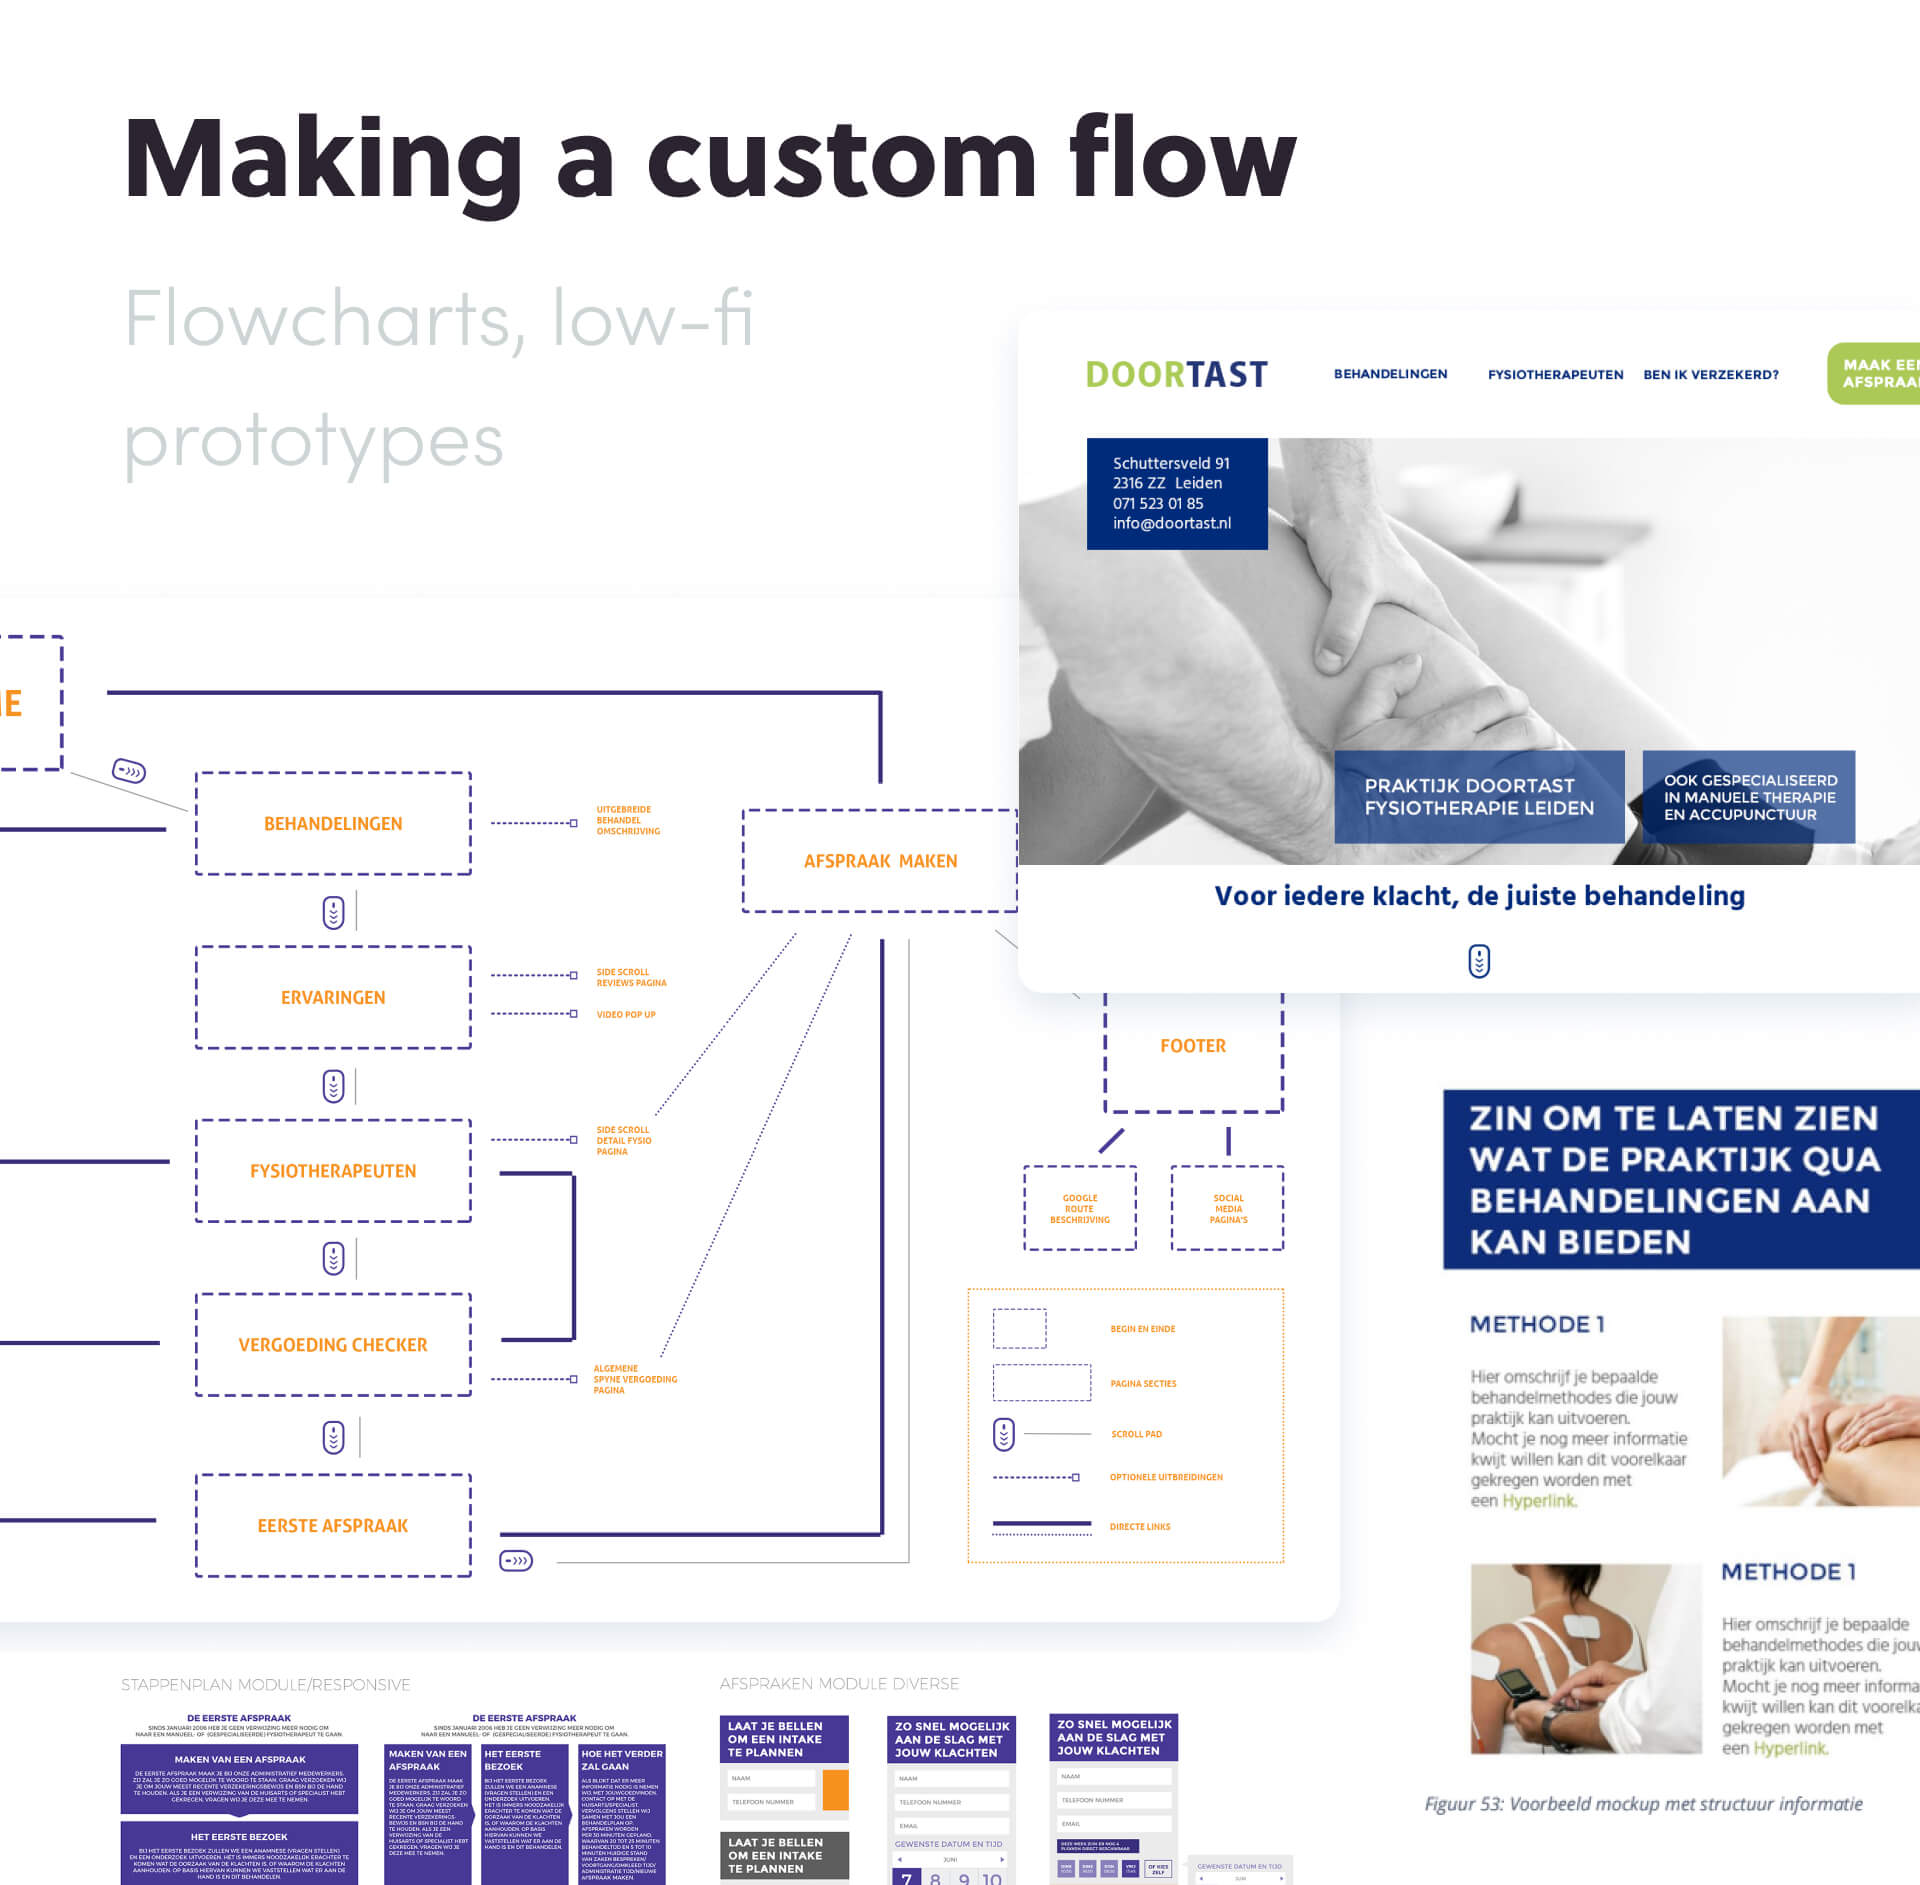 Custom flowchart design for user interface of a medical therapy website featuring steps like treatments, appointments, and therapist information with Dutch text.